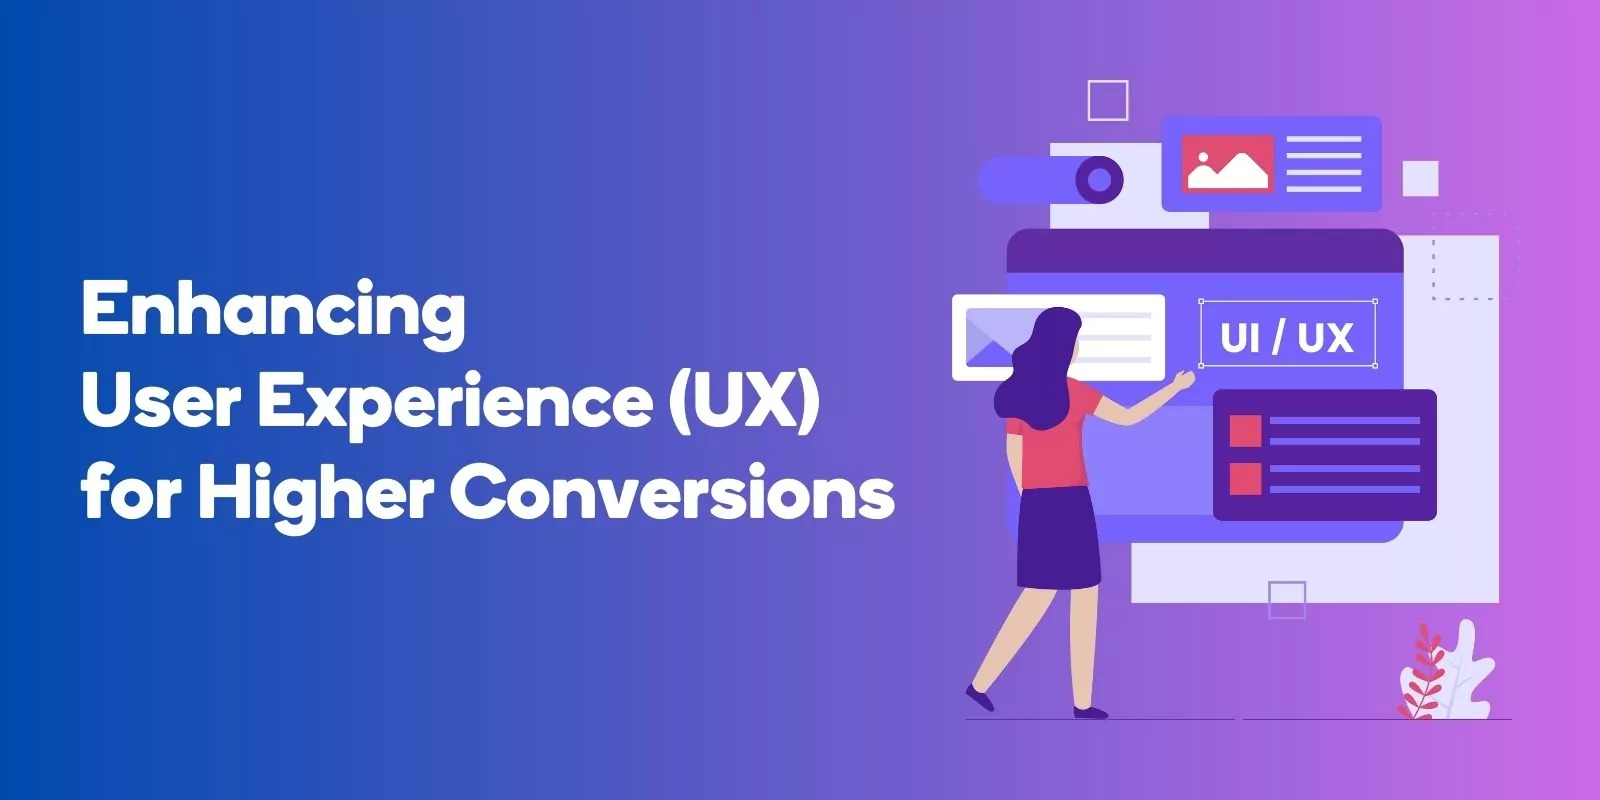 Enhancing User Experience (UX) for Higher Conversions